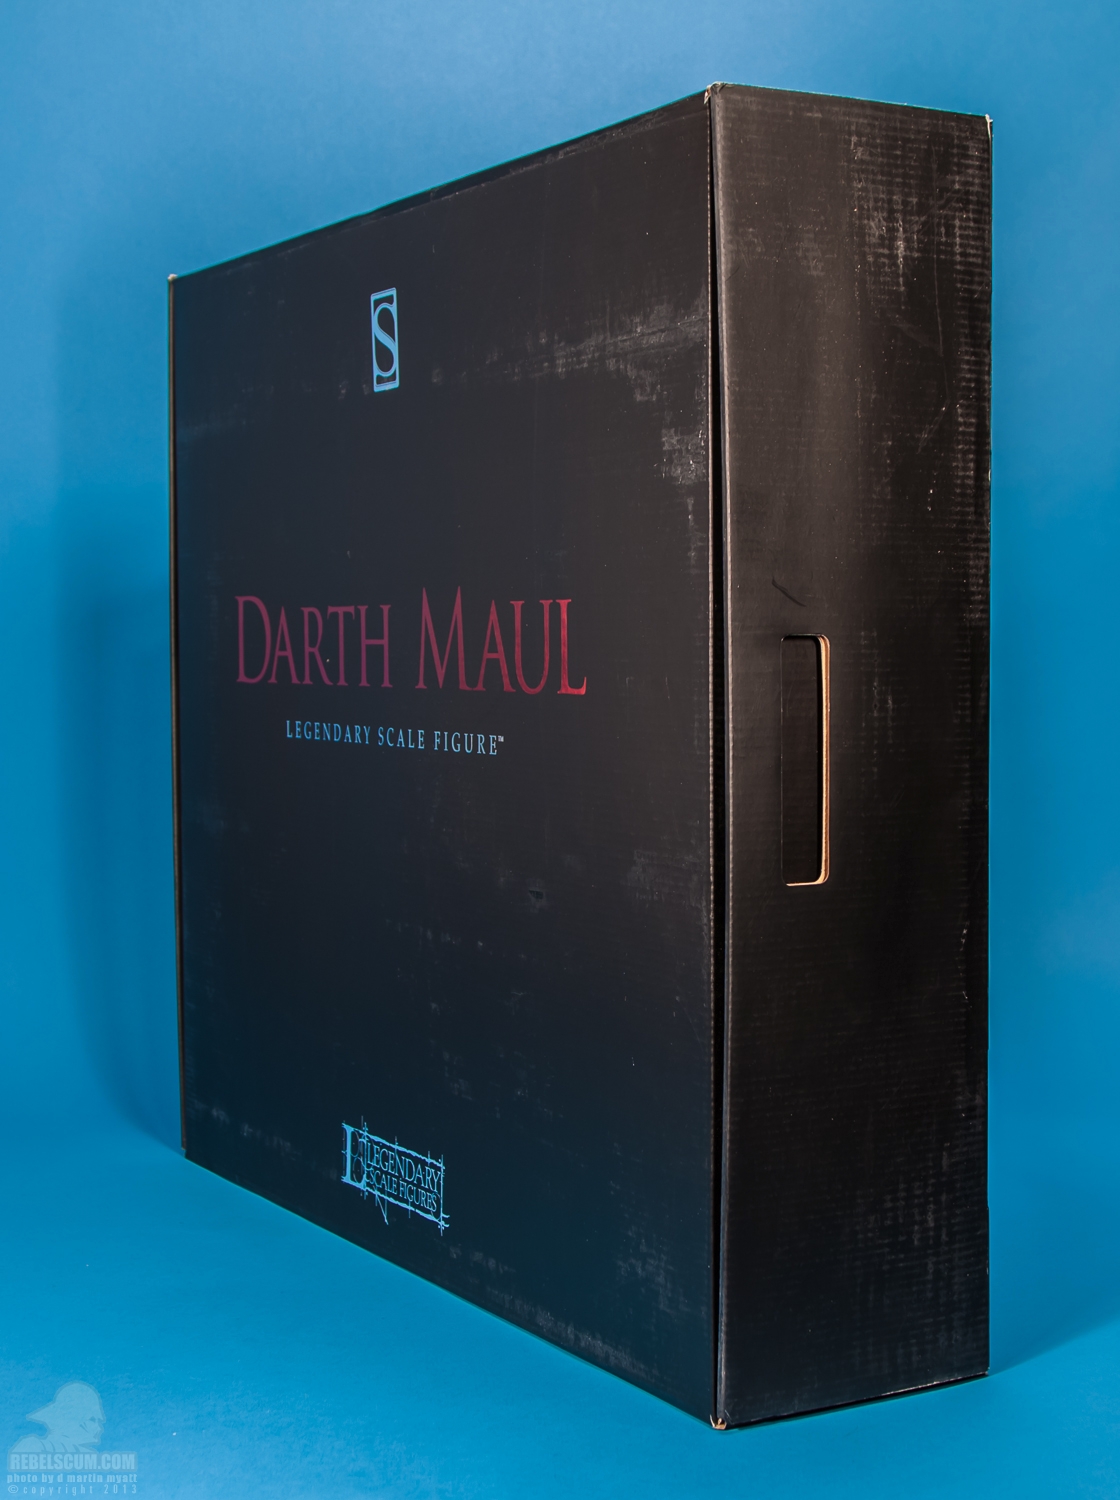 Darth_Maul_Legendary_Scale_Figure_Sideshow_Collectibles-35.jpg